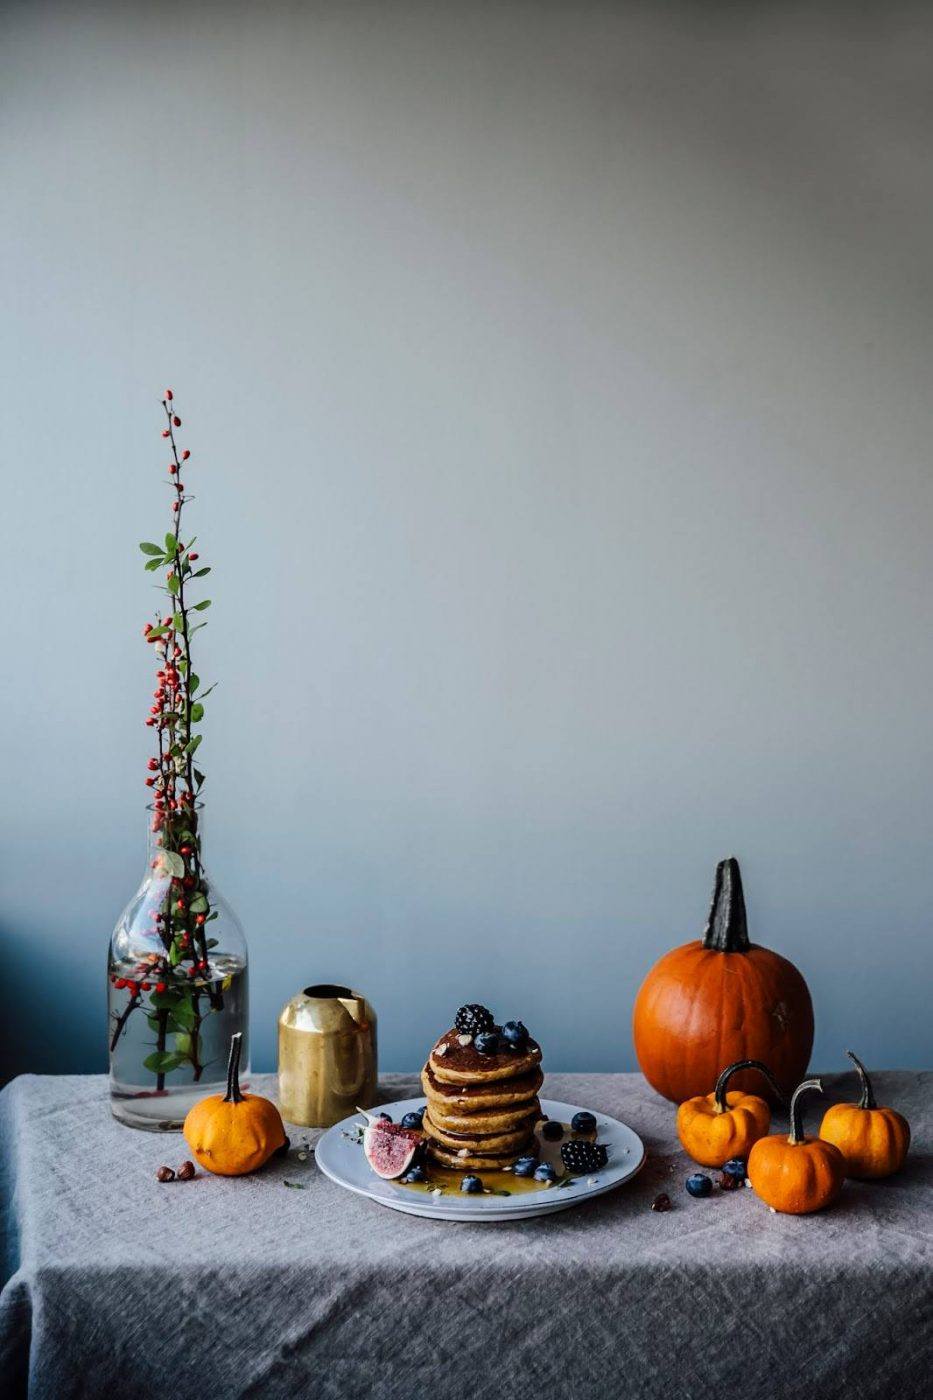 Image for Gluten-free Pumpkin Pancakes, a gluten-free Pear-Lingonberry Cake & a Day in the Electrolux grandcuisine Kitchen in Stockholm